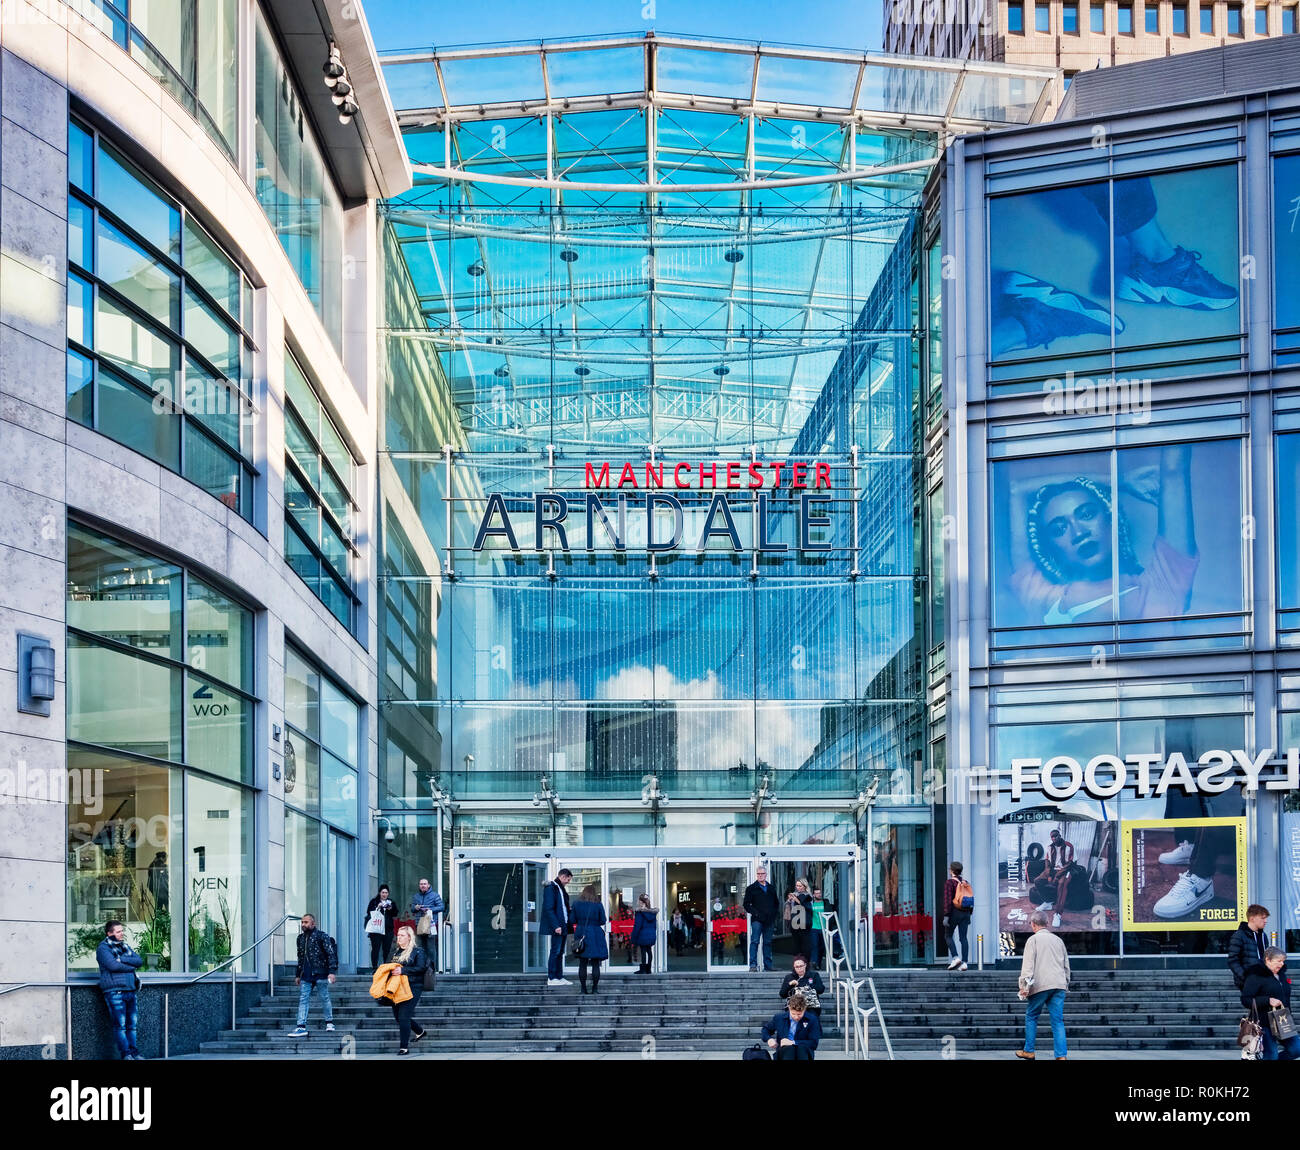 2 November 2018: Manchester, UK -  Corporation Street entrance to the Manchester Arndale shopping centre, one of the largest in the UK. Stock Photo